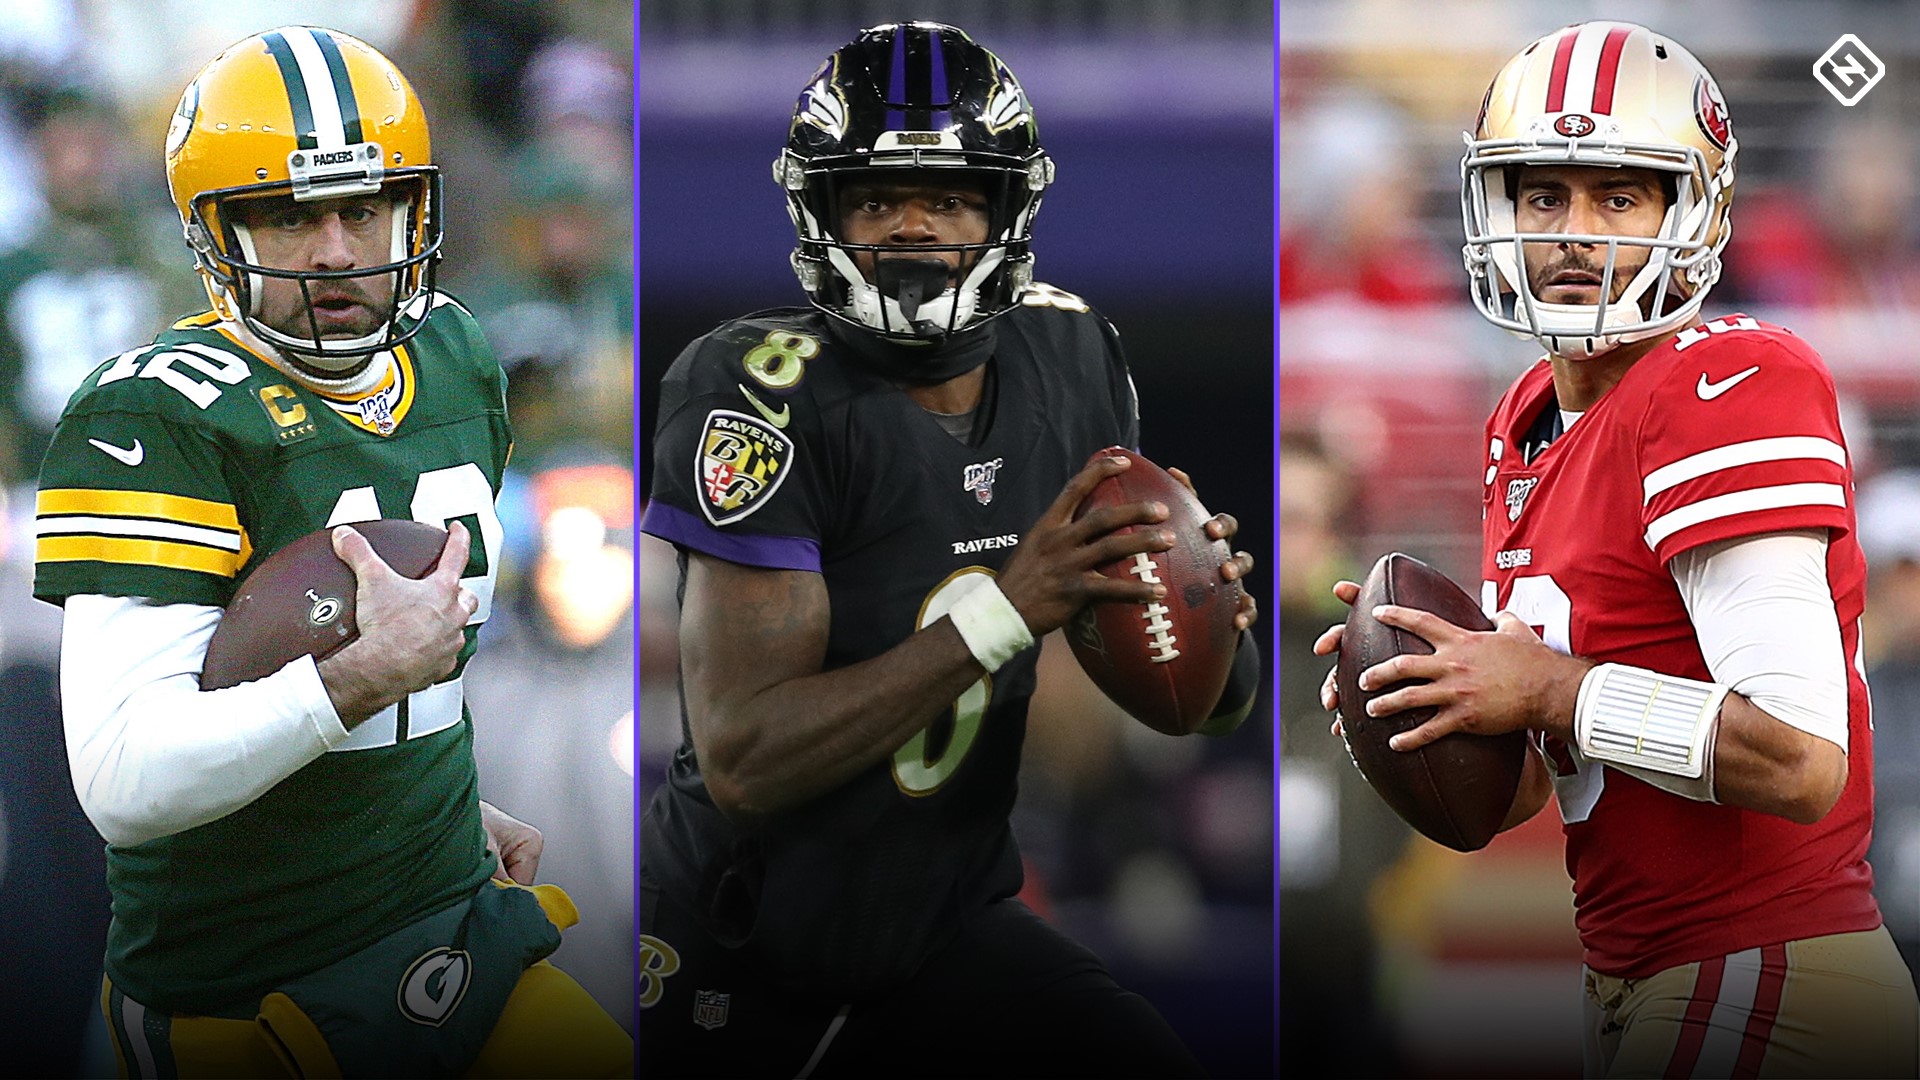 NFL playoff power rankings 2020: Every team's real chances ...